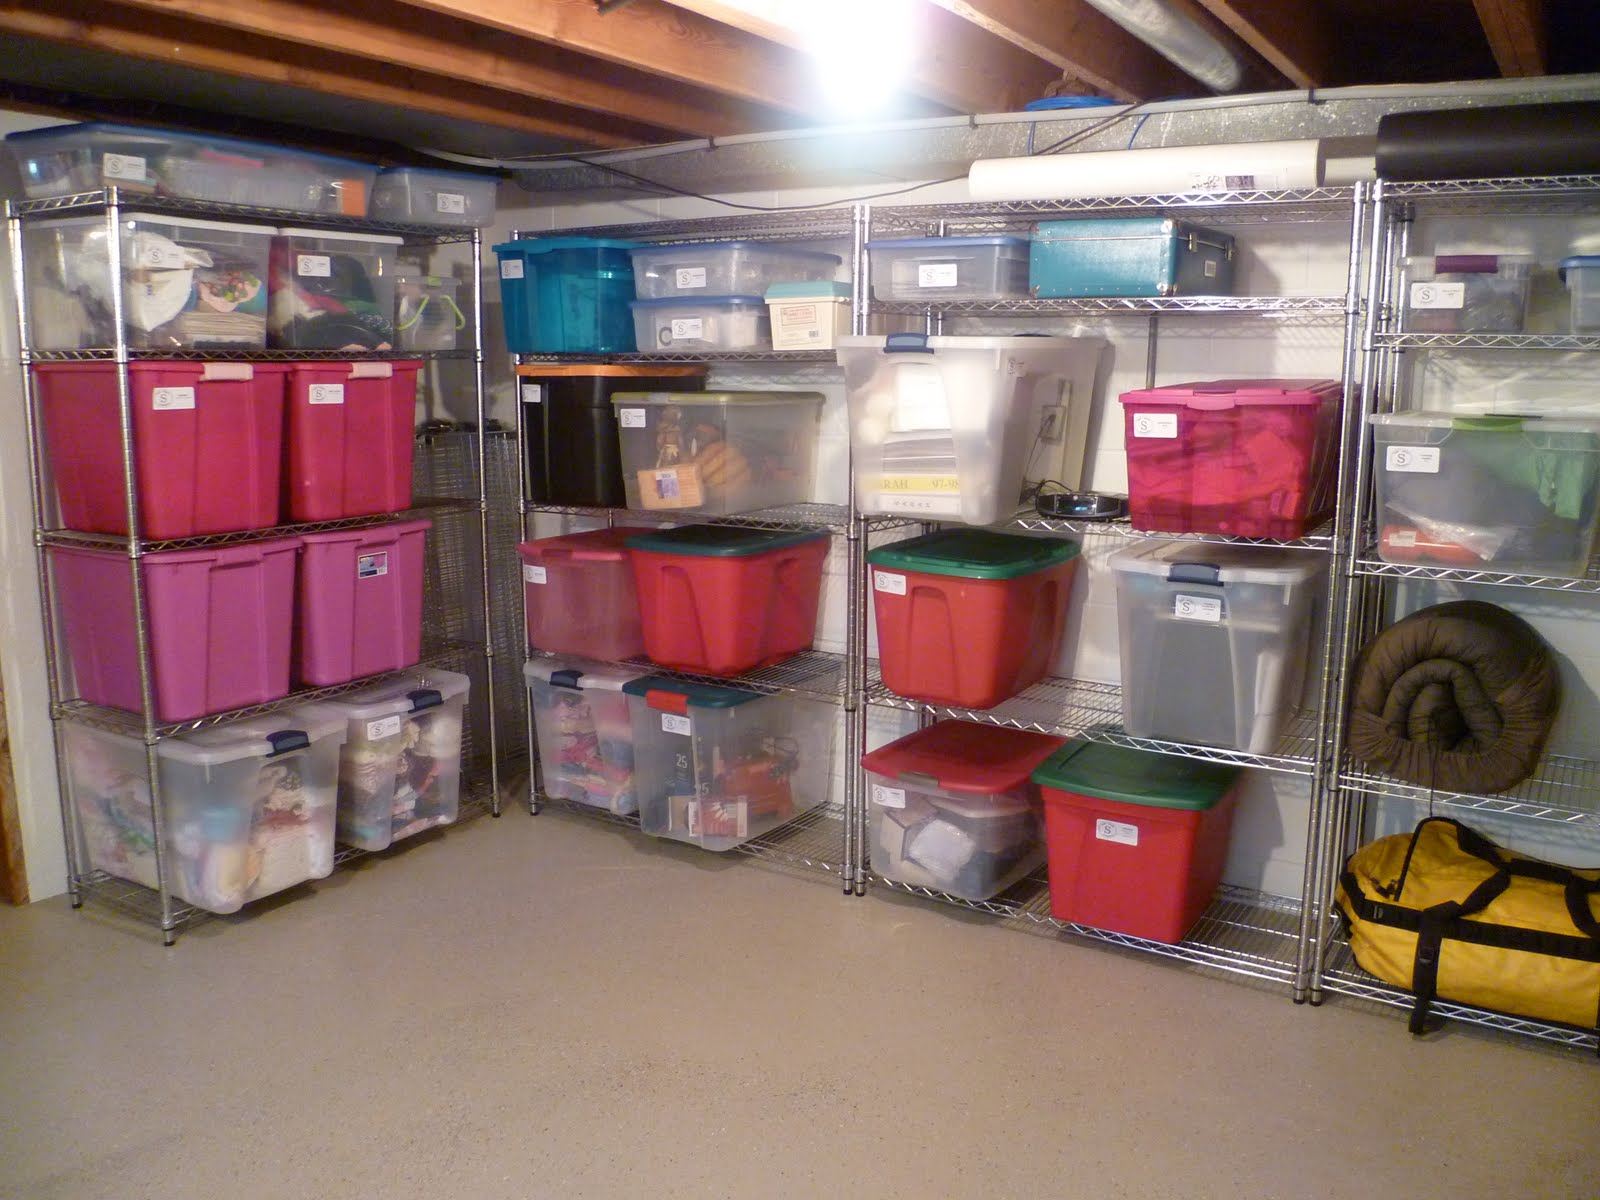 Our Old House: Storage Room COMPLETE!